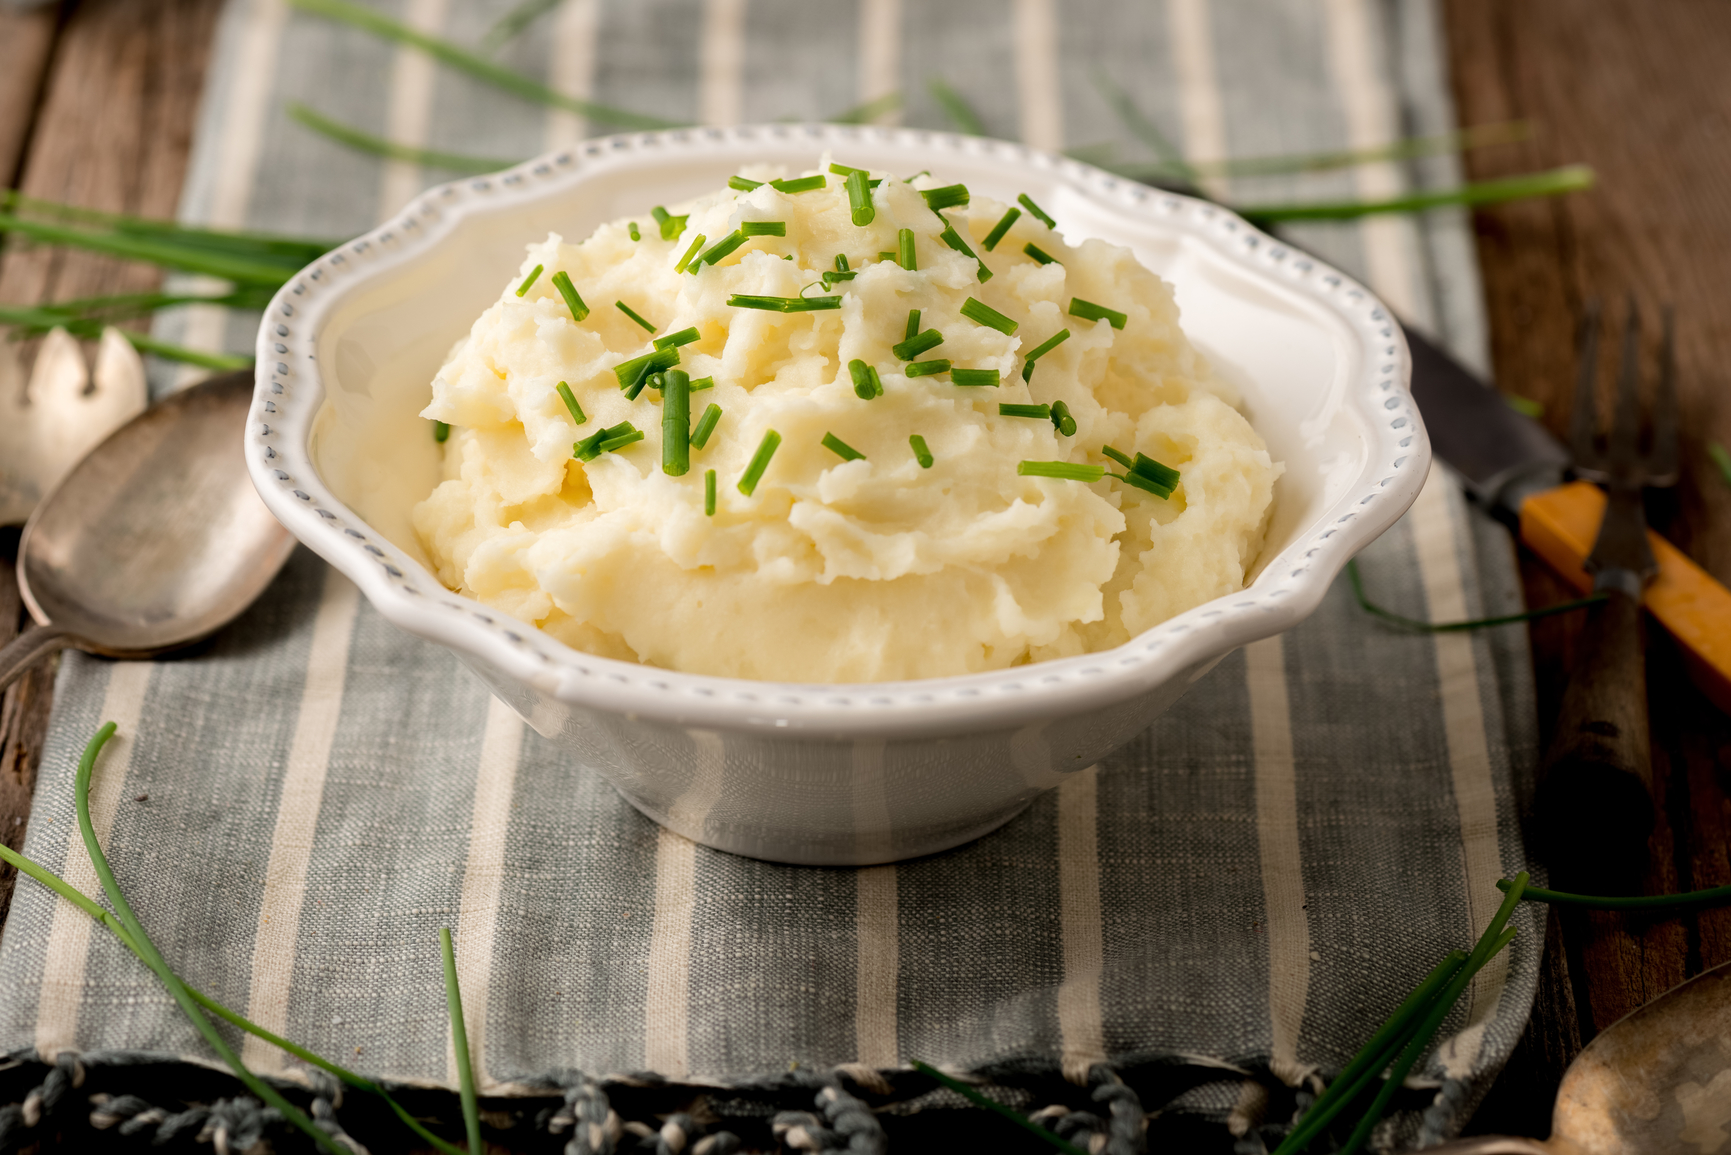 mashed turnips - South Beach Diet